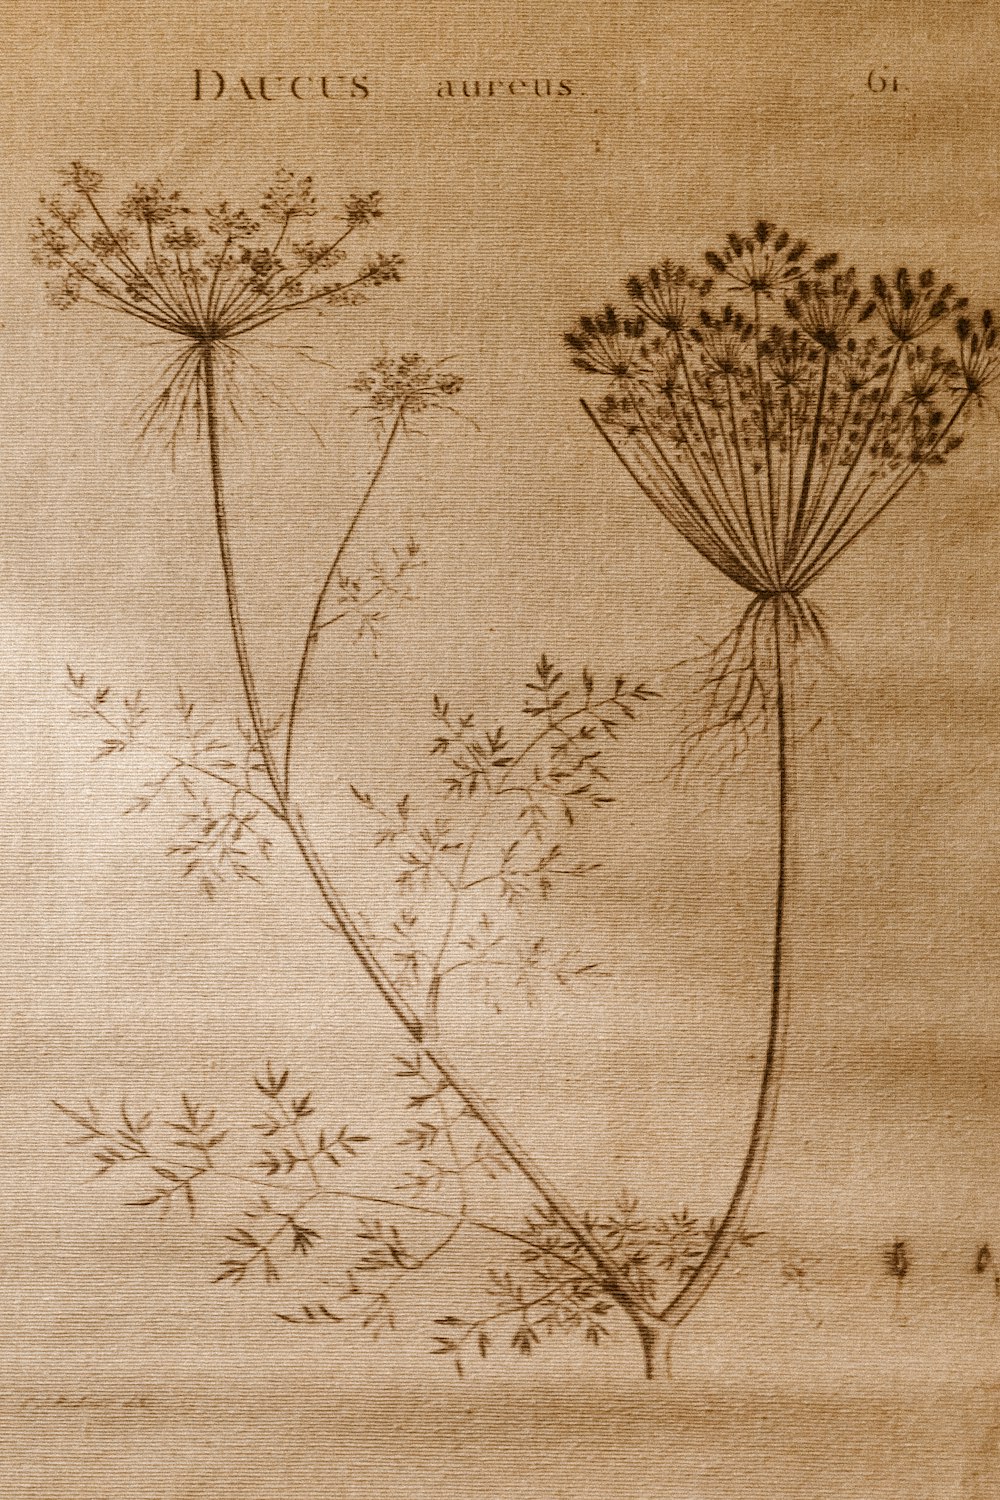 a drawing of a dandelion plant on a piece of paper